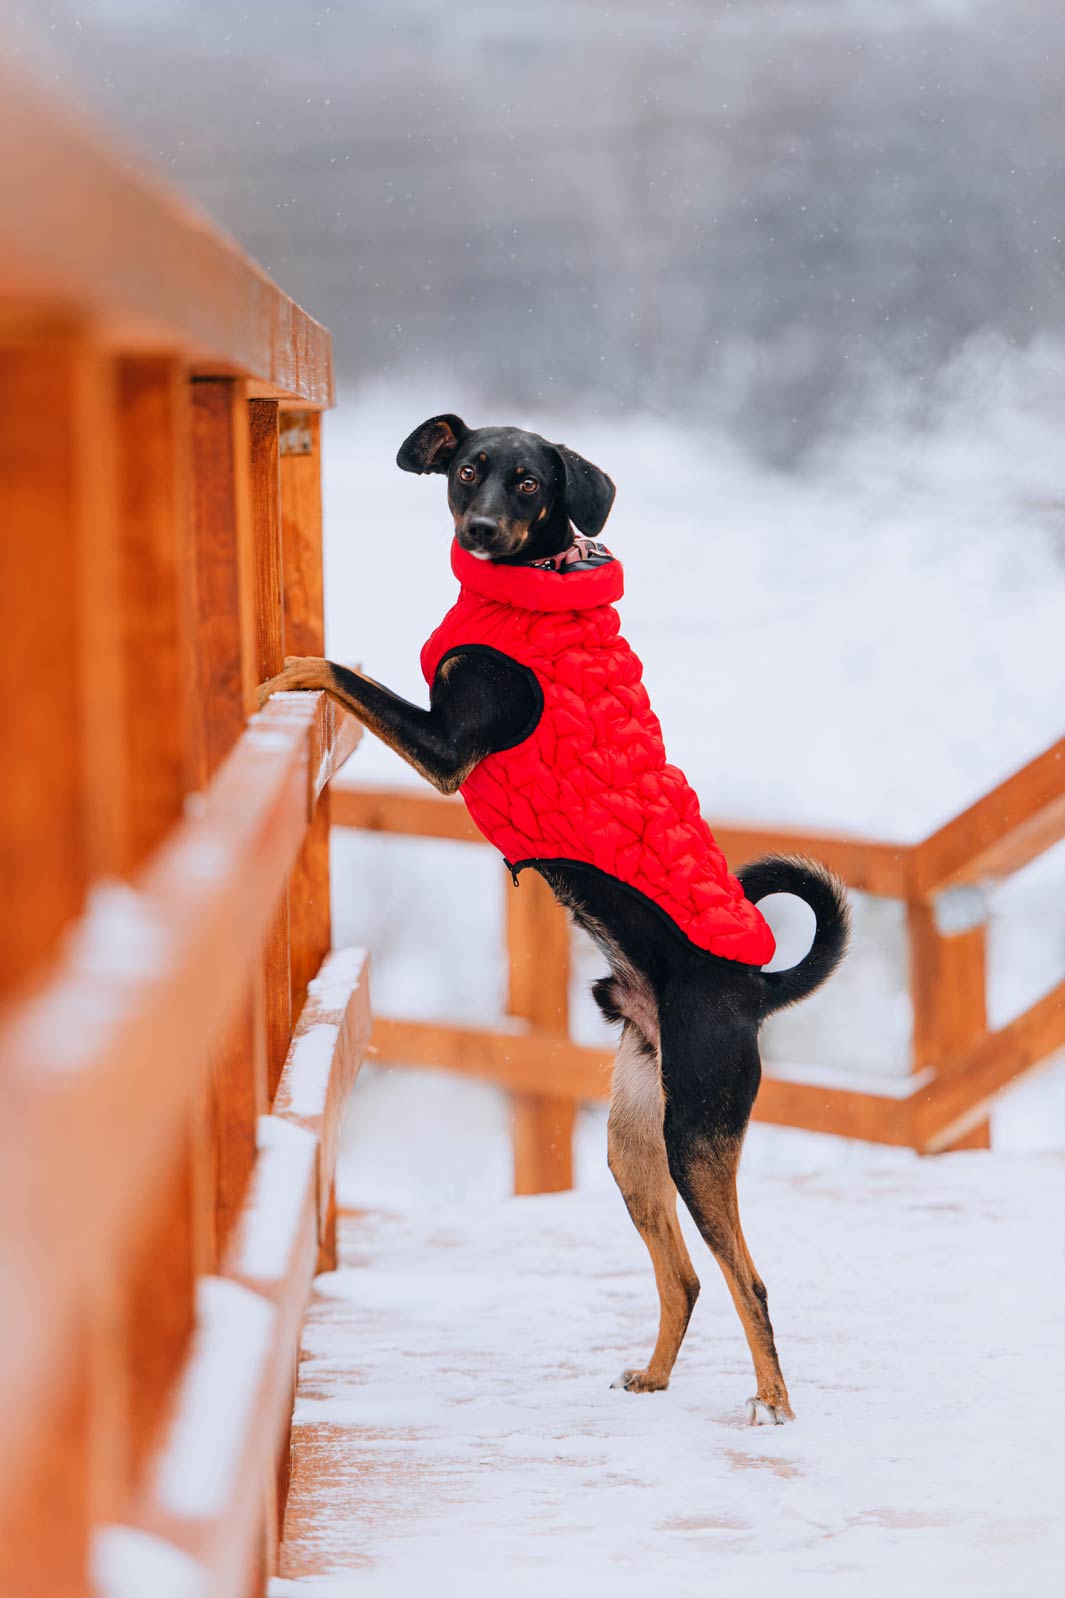 Mix breed dog wearing a bright red winter jacket staying warm and keeping cool outdoors.